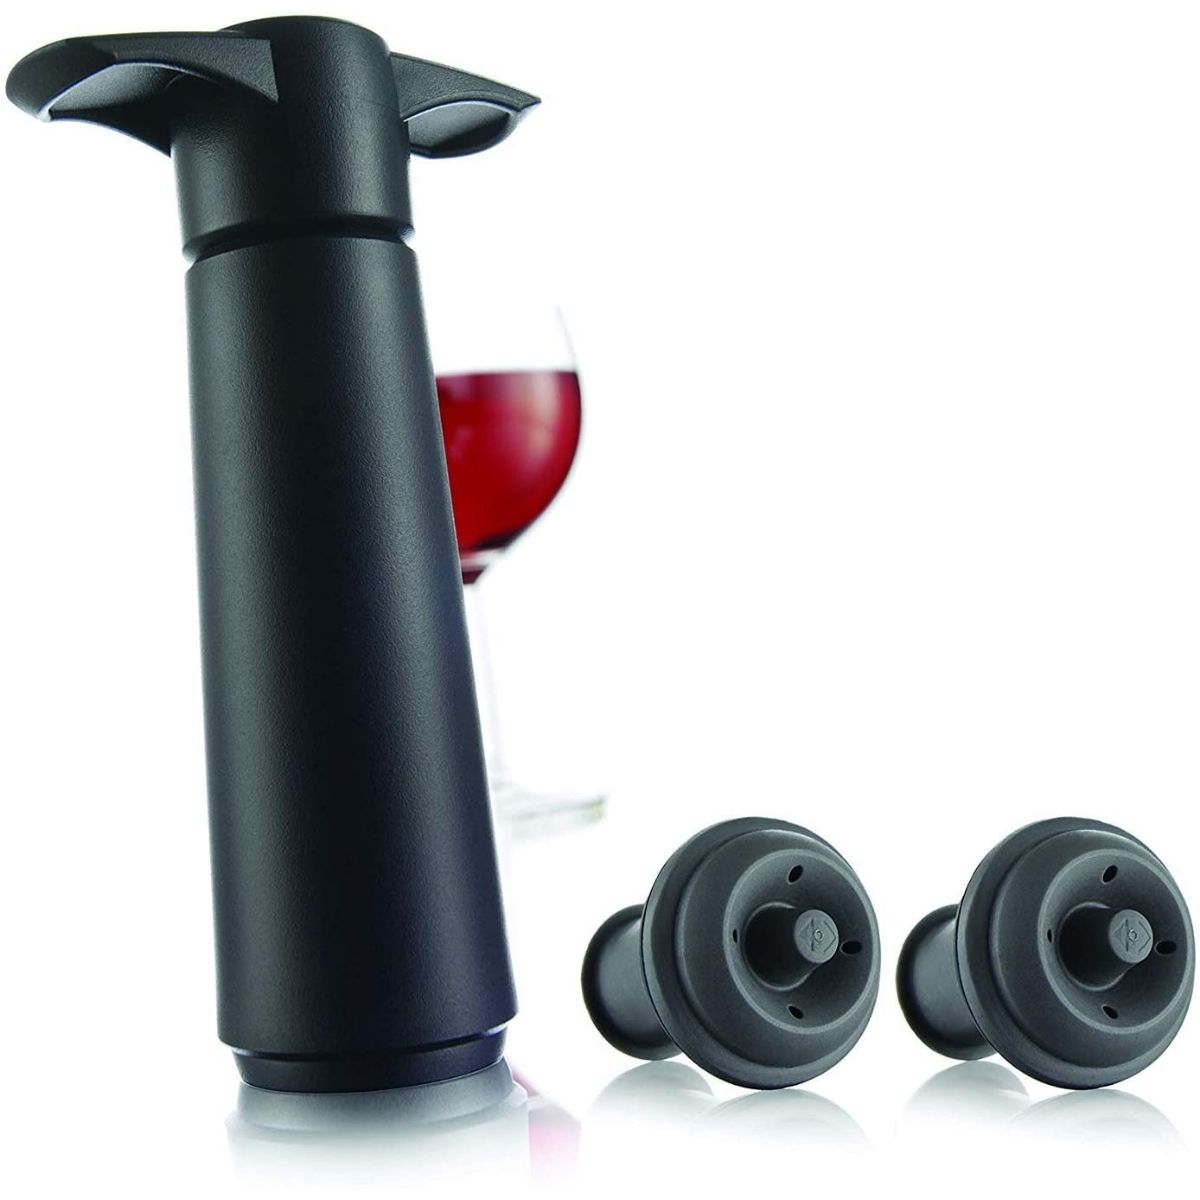 The Best Gifts for Wine Lovers Option: The Original Vacu Vin Wine Saver